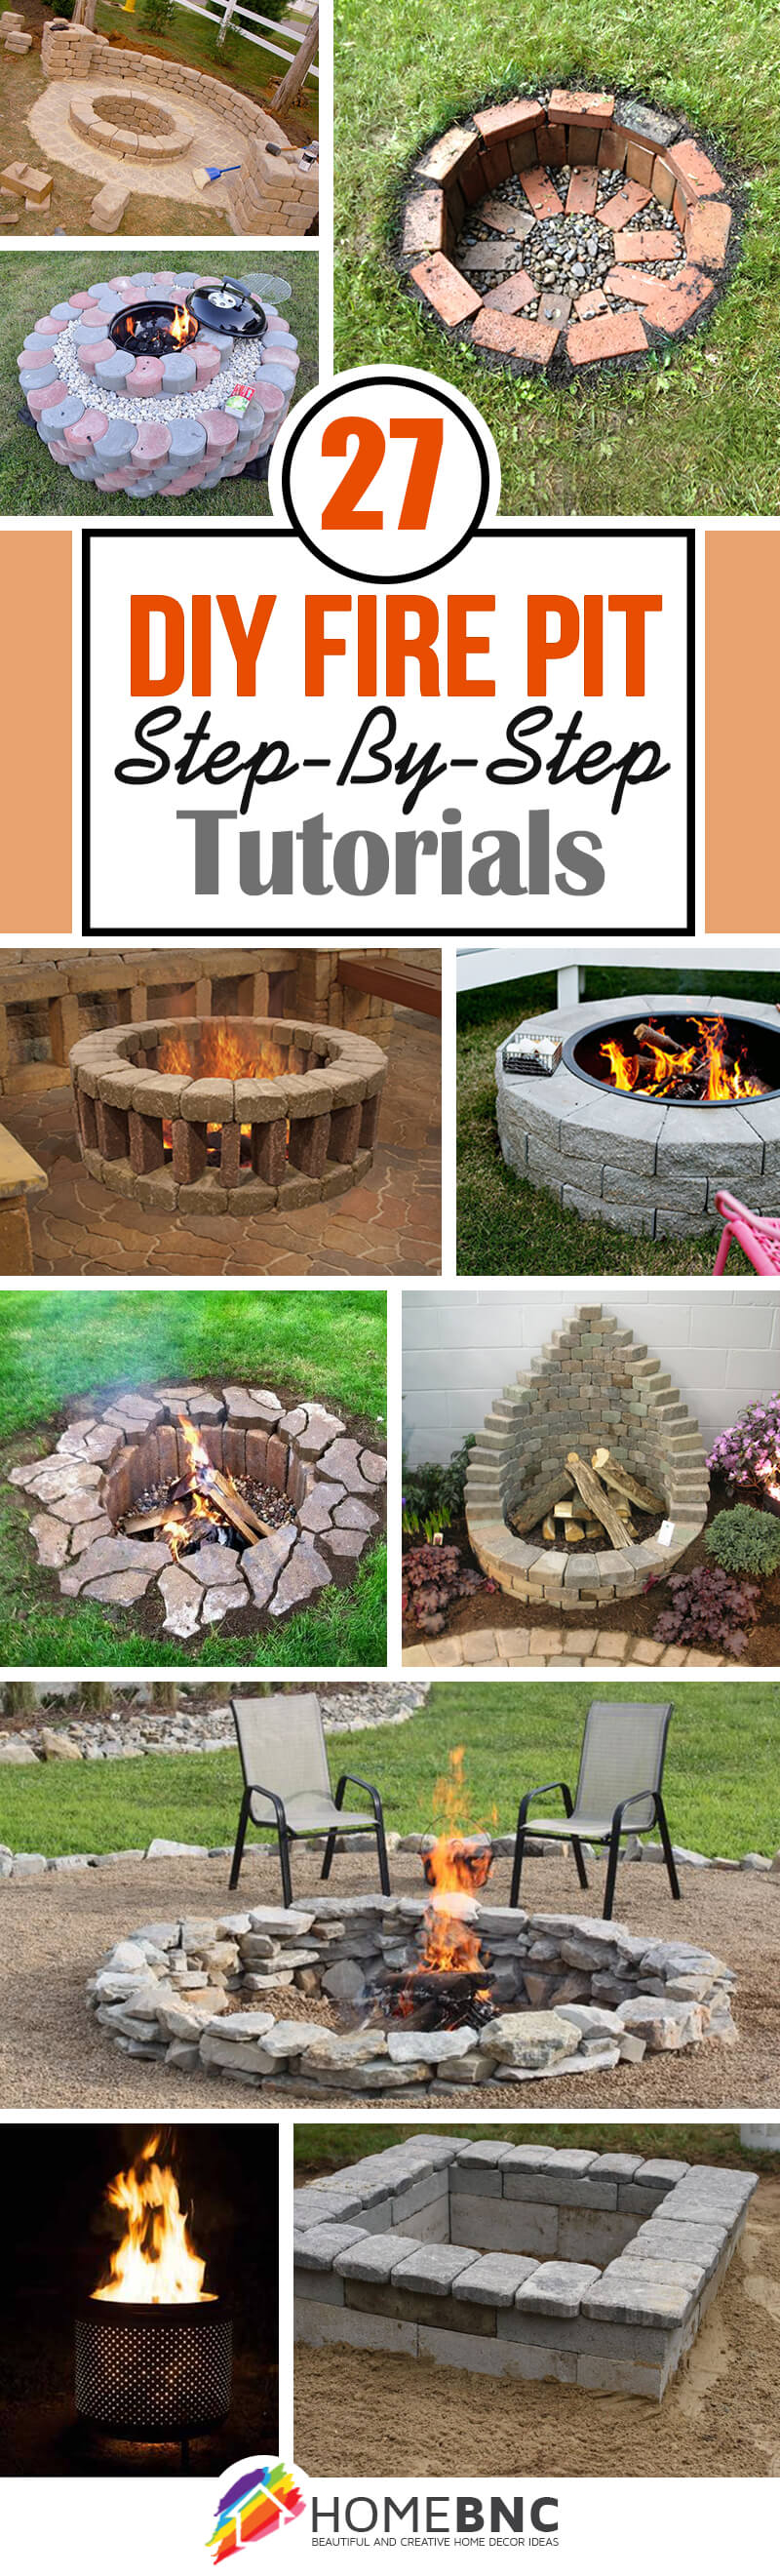 27 Best Diy Firepit Ideas And Designs, How To Make Outdoor Fire Pit Area